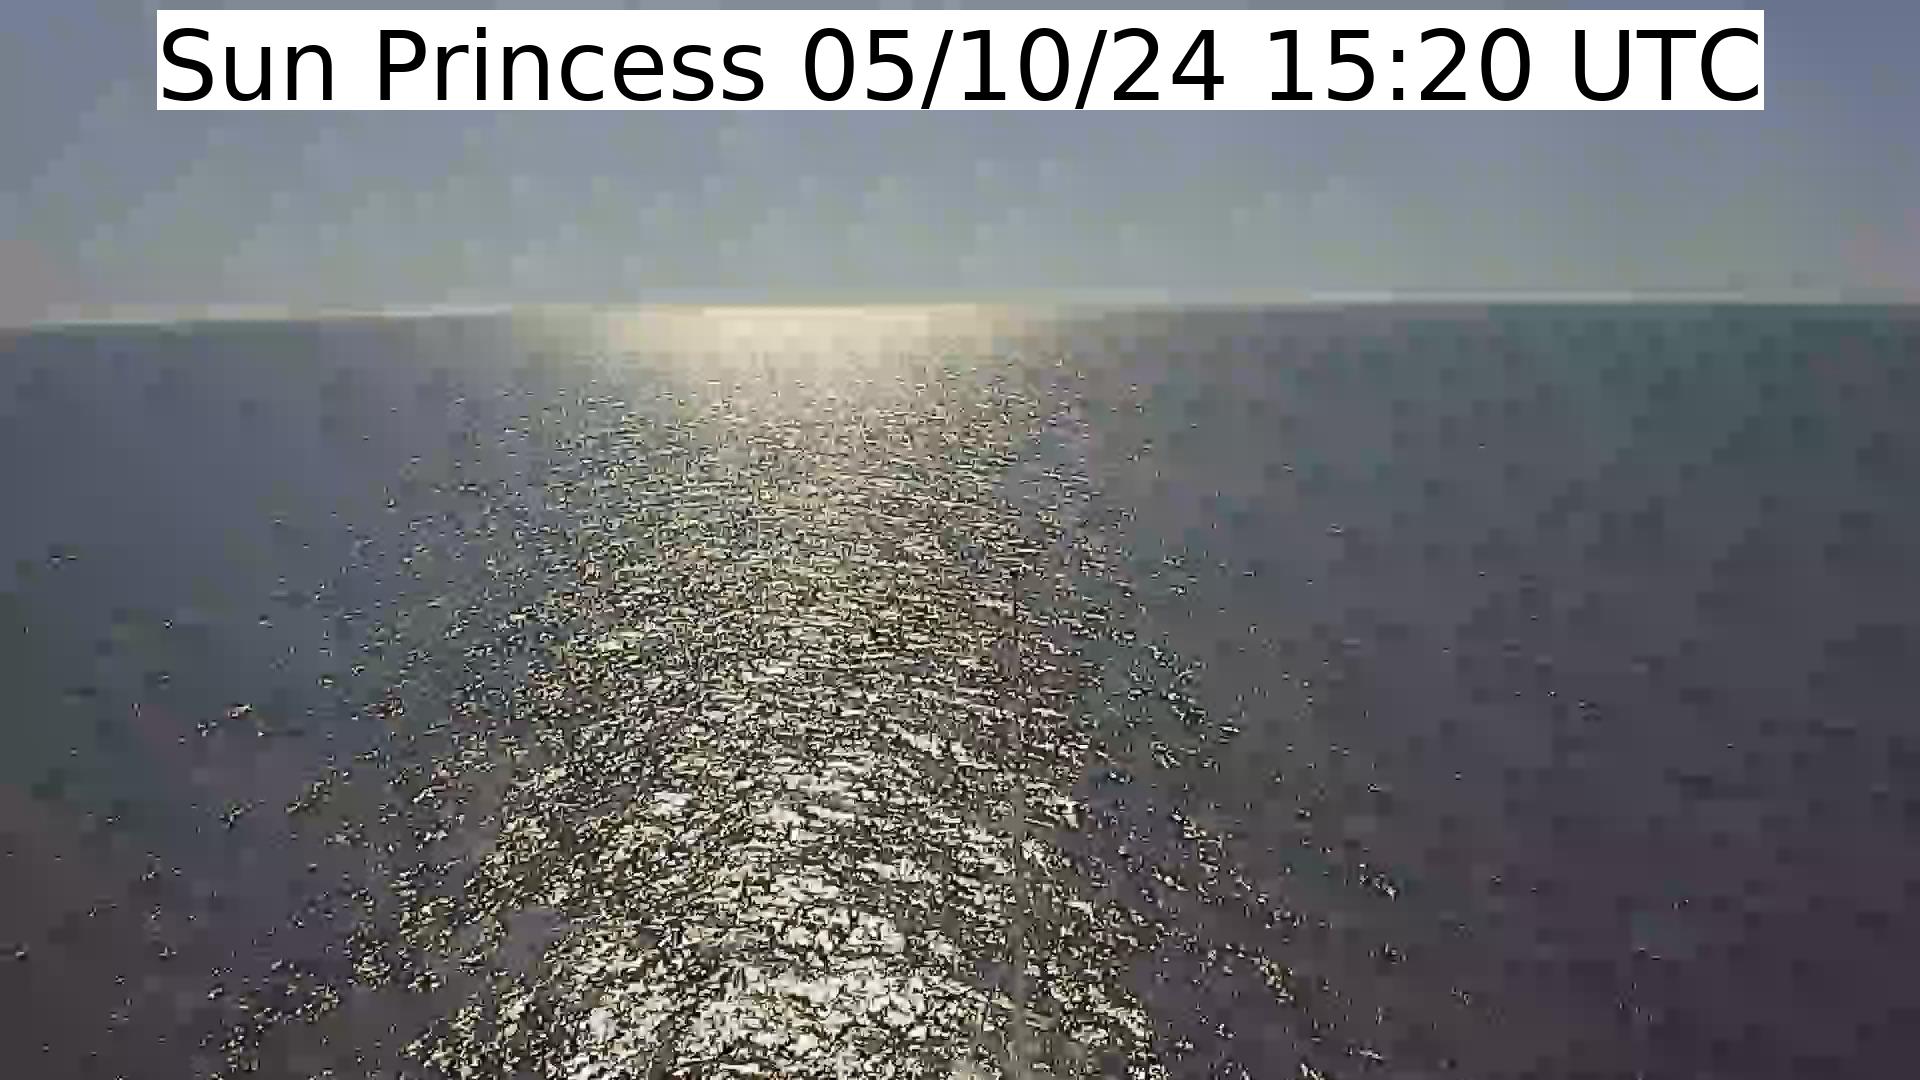 A live picture from the bridge of the Sun Princess